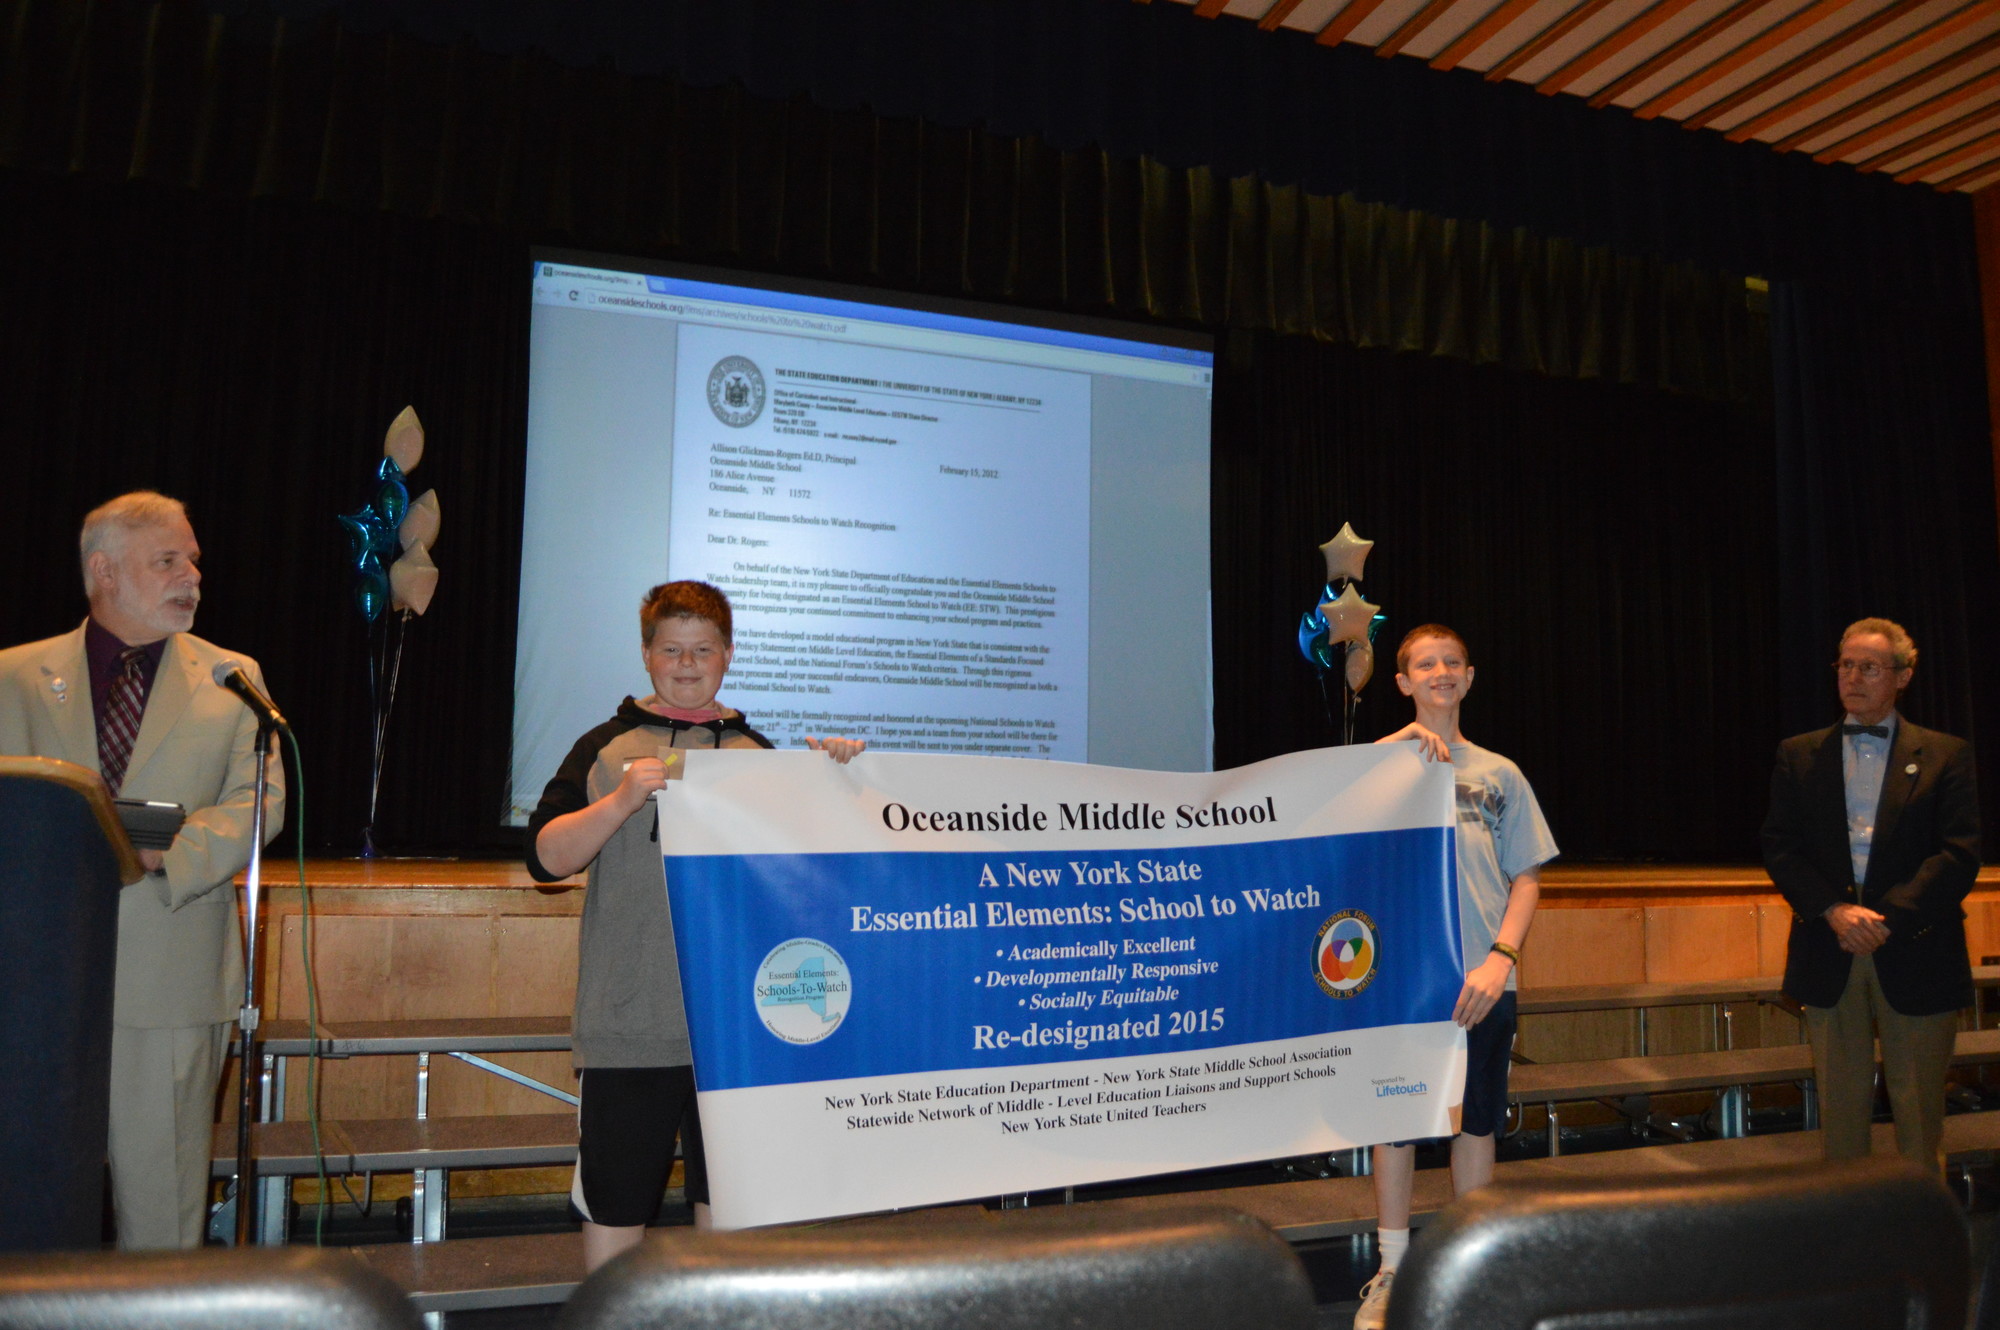 Noah Scott and Paul Lestella held up a banner recognizing Oceanside Middle School as a “School to Watch”.